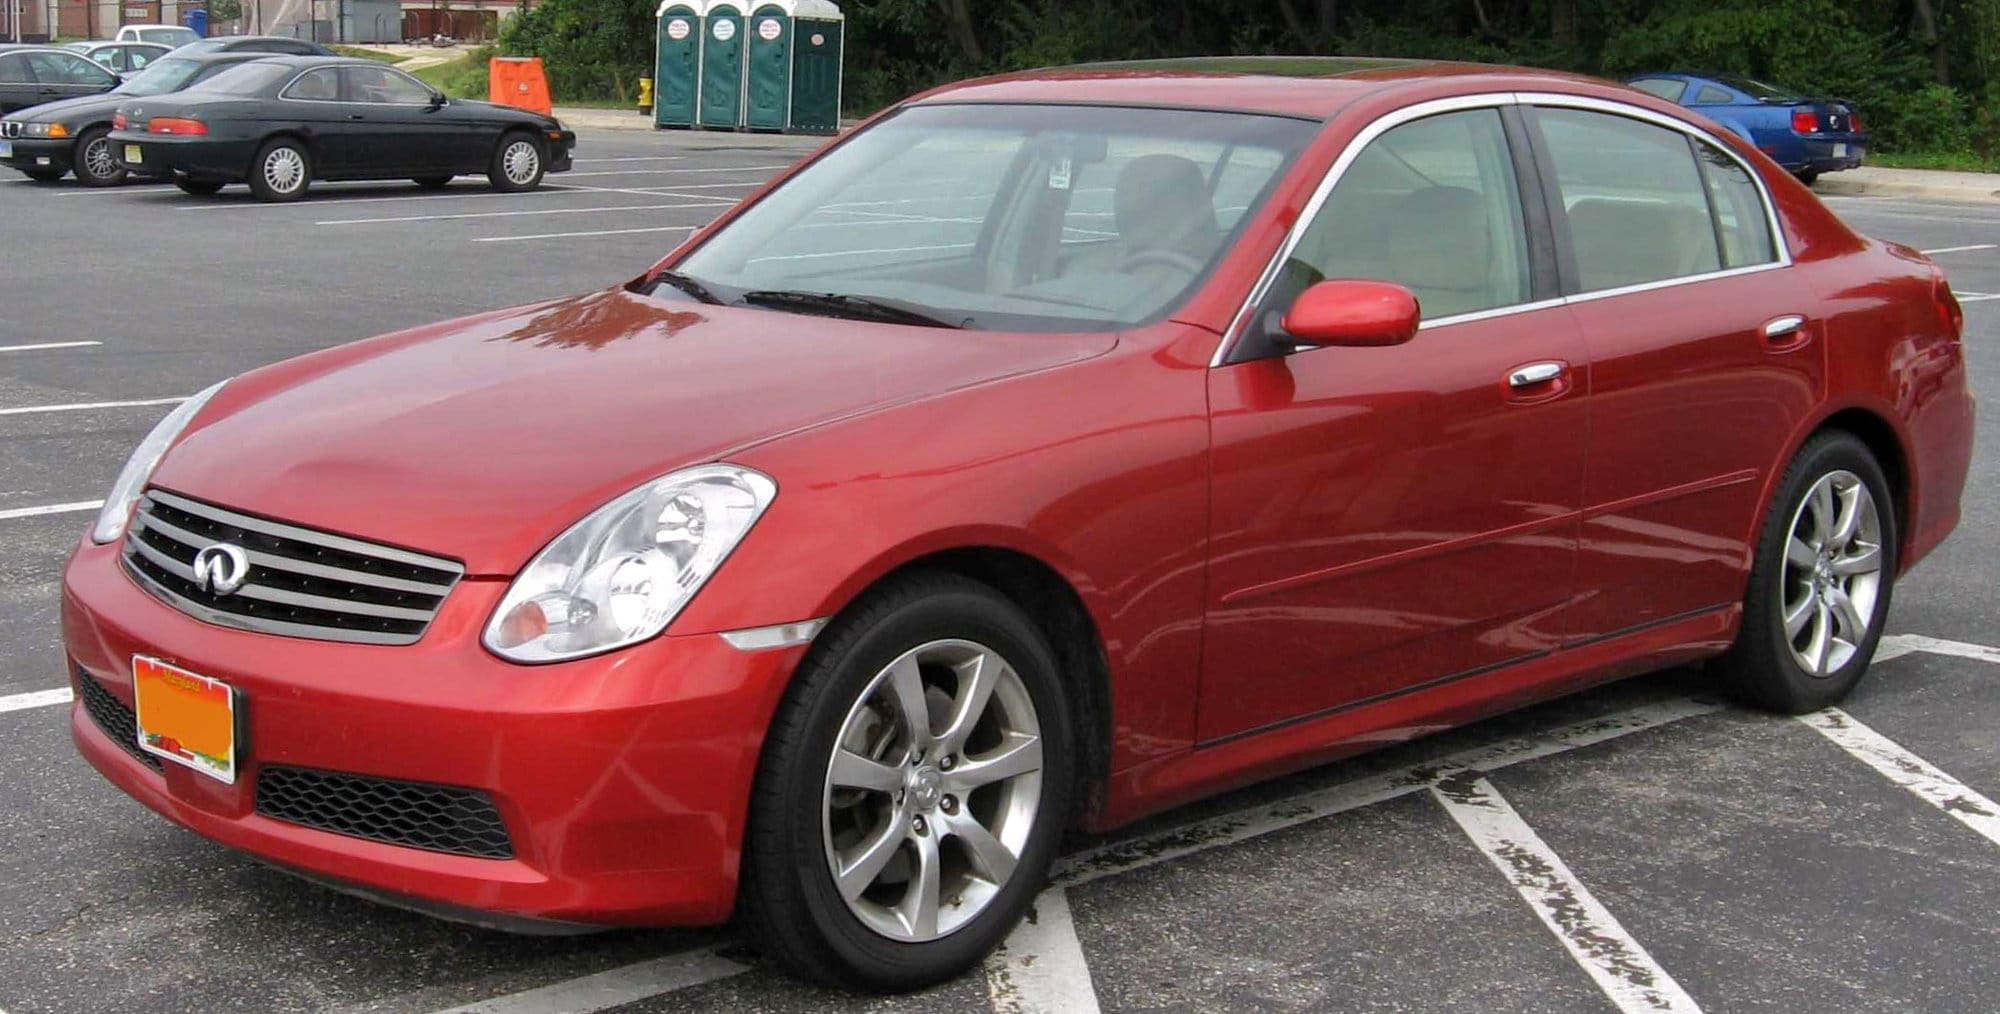 Infiniti G35 Buyers Guide: Reliability, Specs & Common Problems | Low Offset